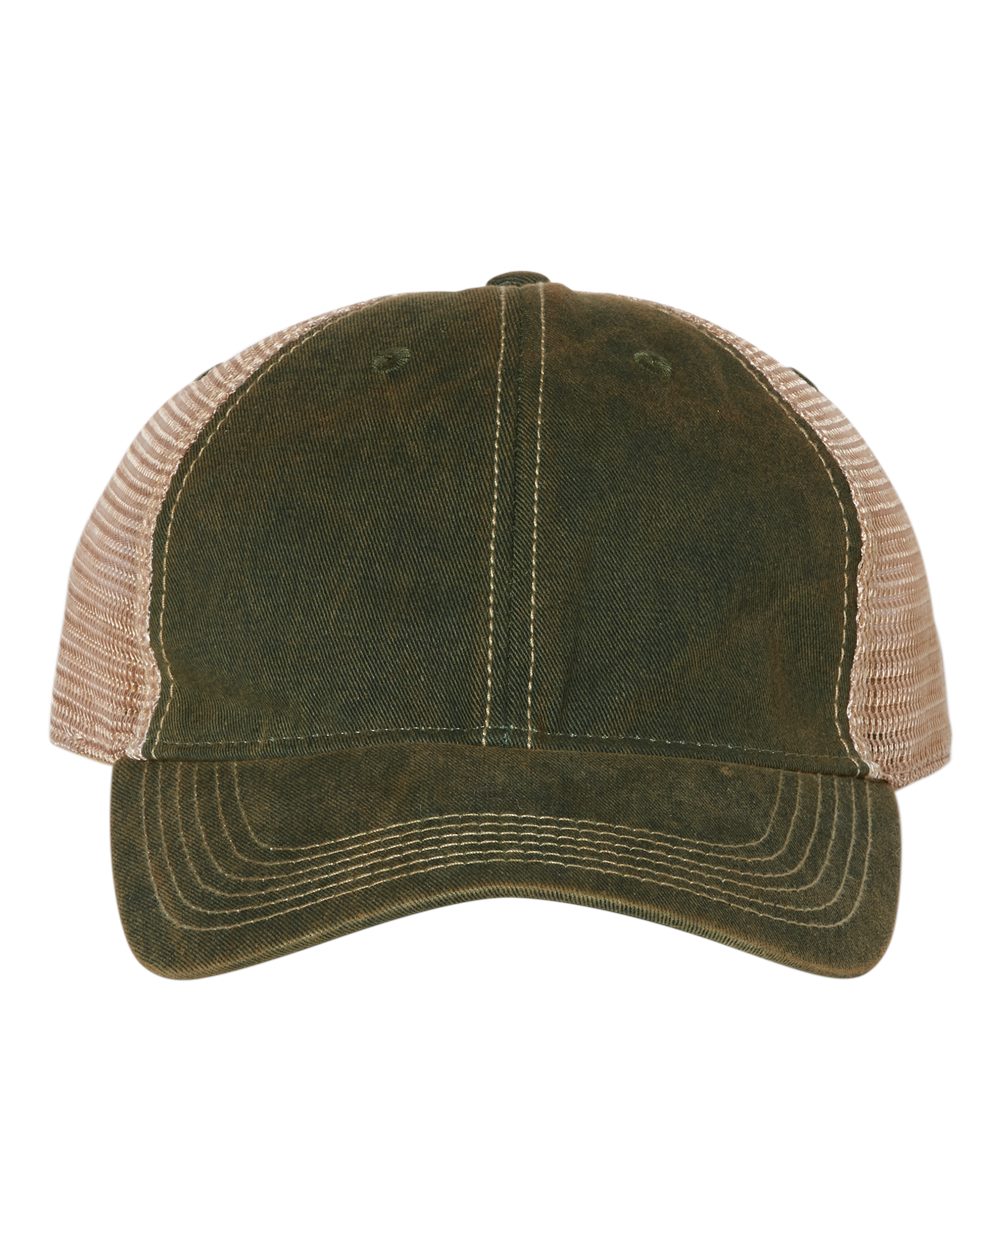 Front view of LEGACY OFA custom hat in dark green and khaki